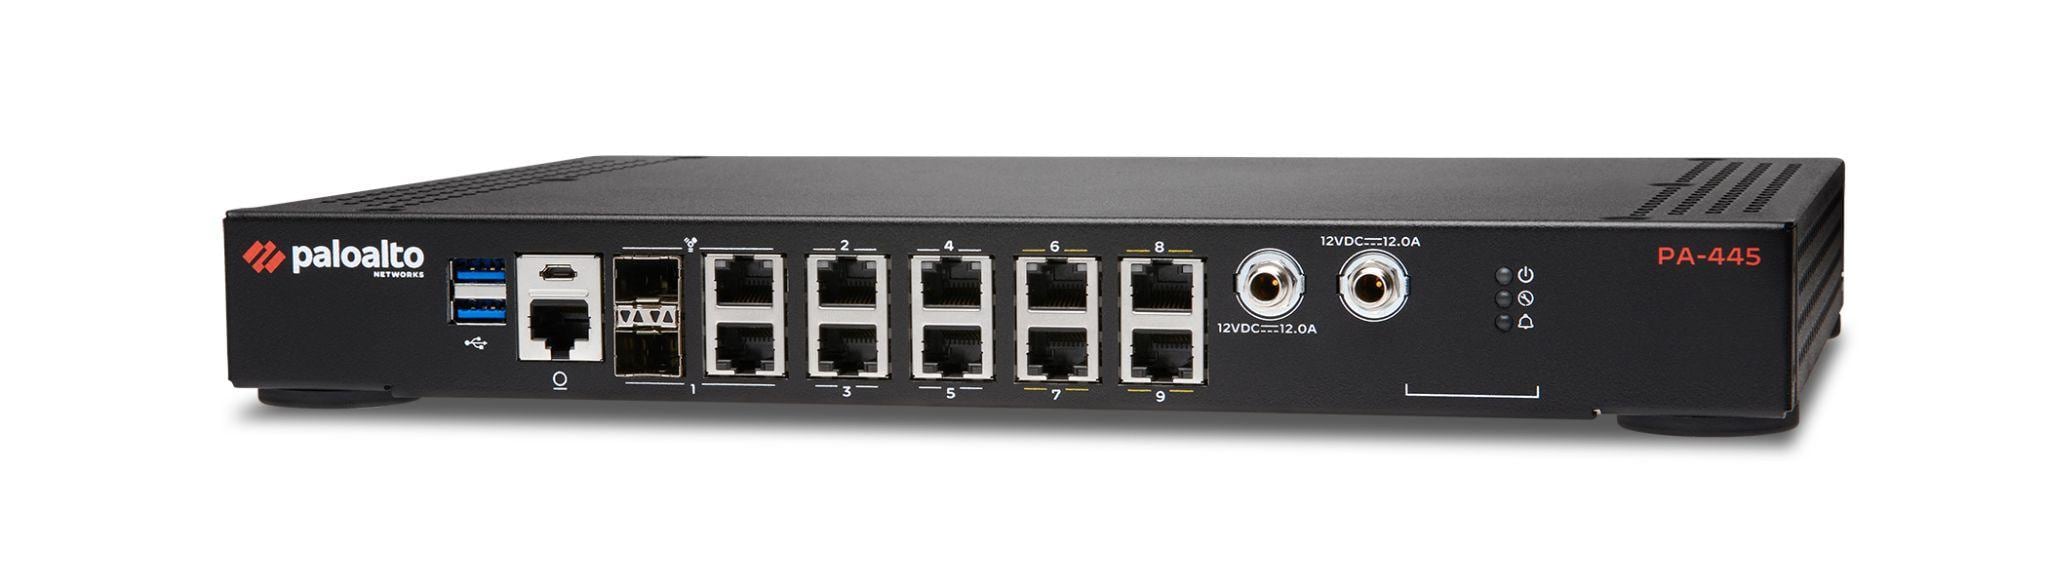 Image of the Palo Alto Networks PA-445 ML-Powered NGFW hardware.